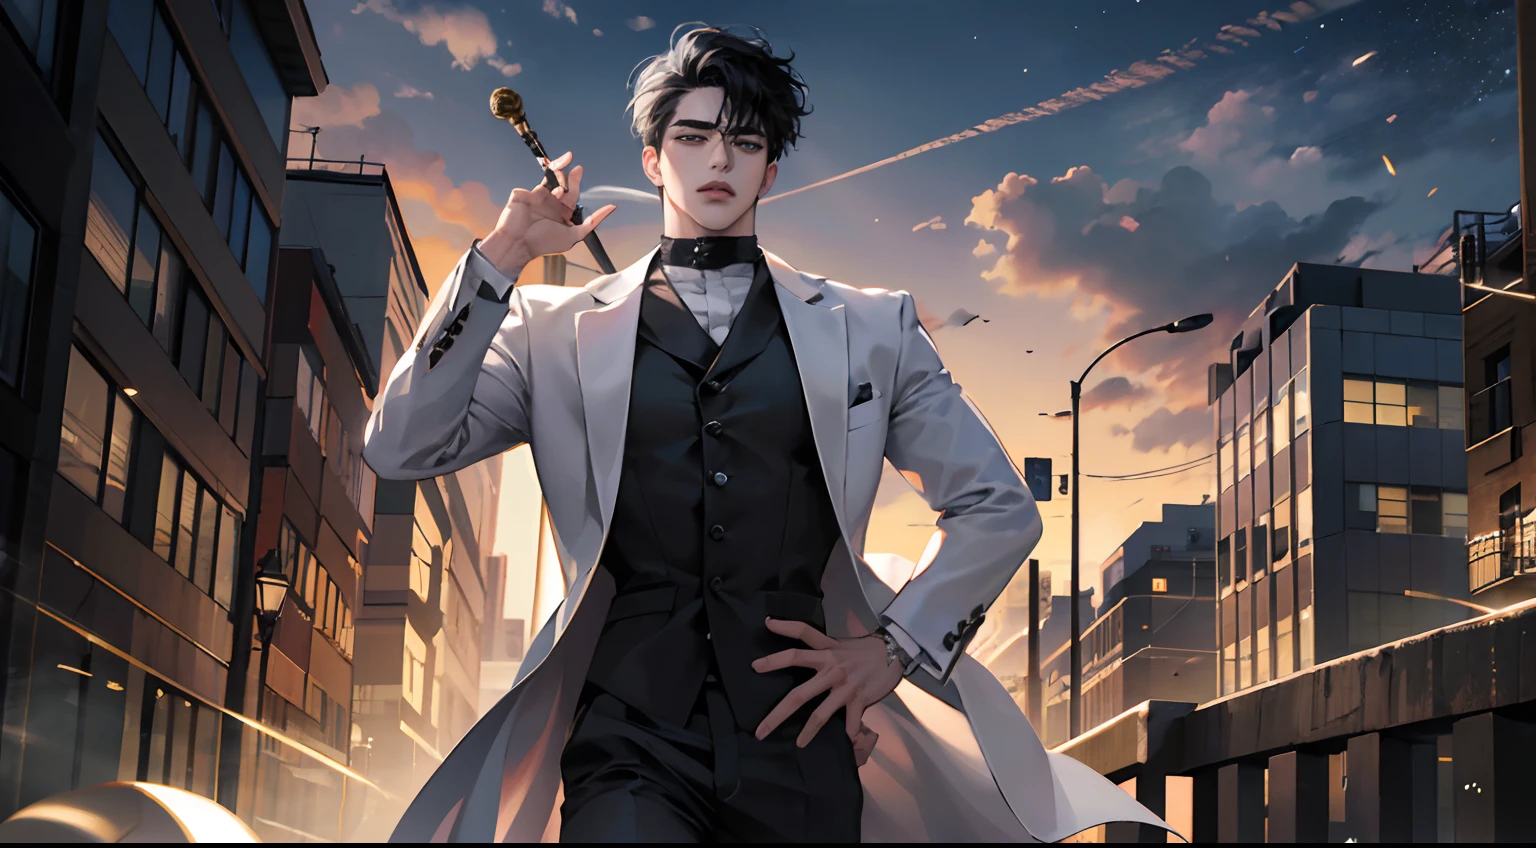 (photo the 8k, Best Quality, Masterpiece: 1.2), (realist, fotorrealist: 1.37) YOUNG, Handsome man, Mark Sir, Got7, White skin, detailed face, bright gray eye, black hair, black suit, bad boy, yakuza, tattoo, smoke cigarette, A night city of gangsters with a backdrop, action pose, skull earring, collar,